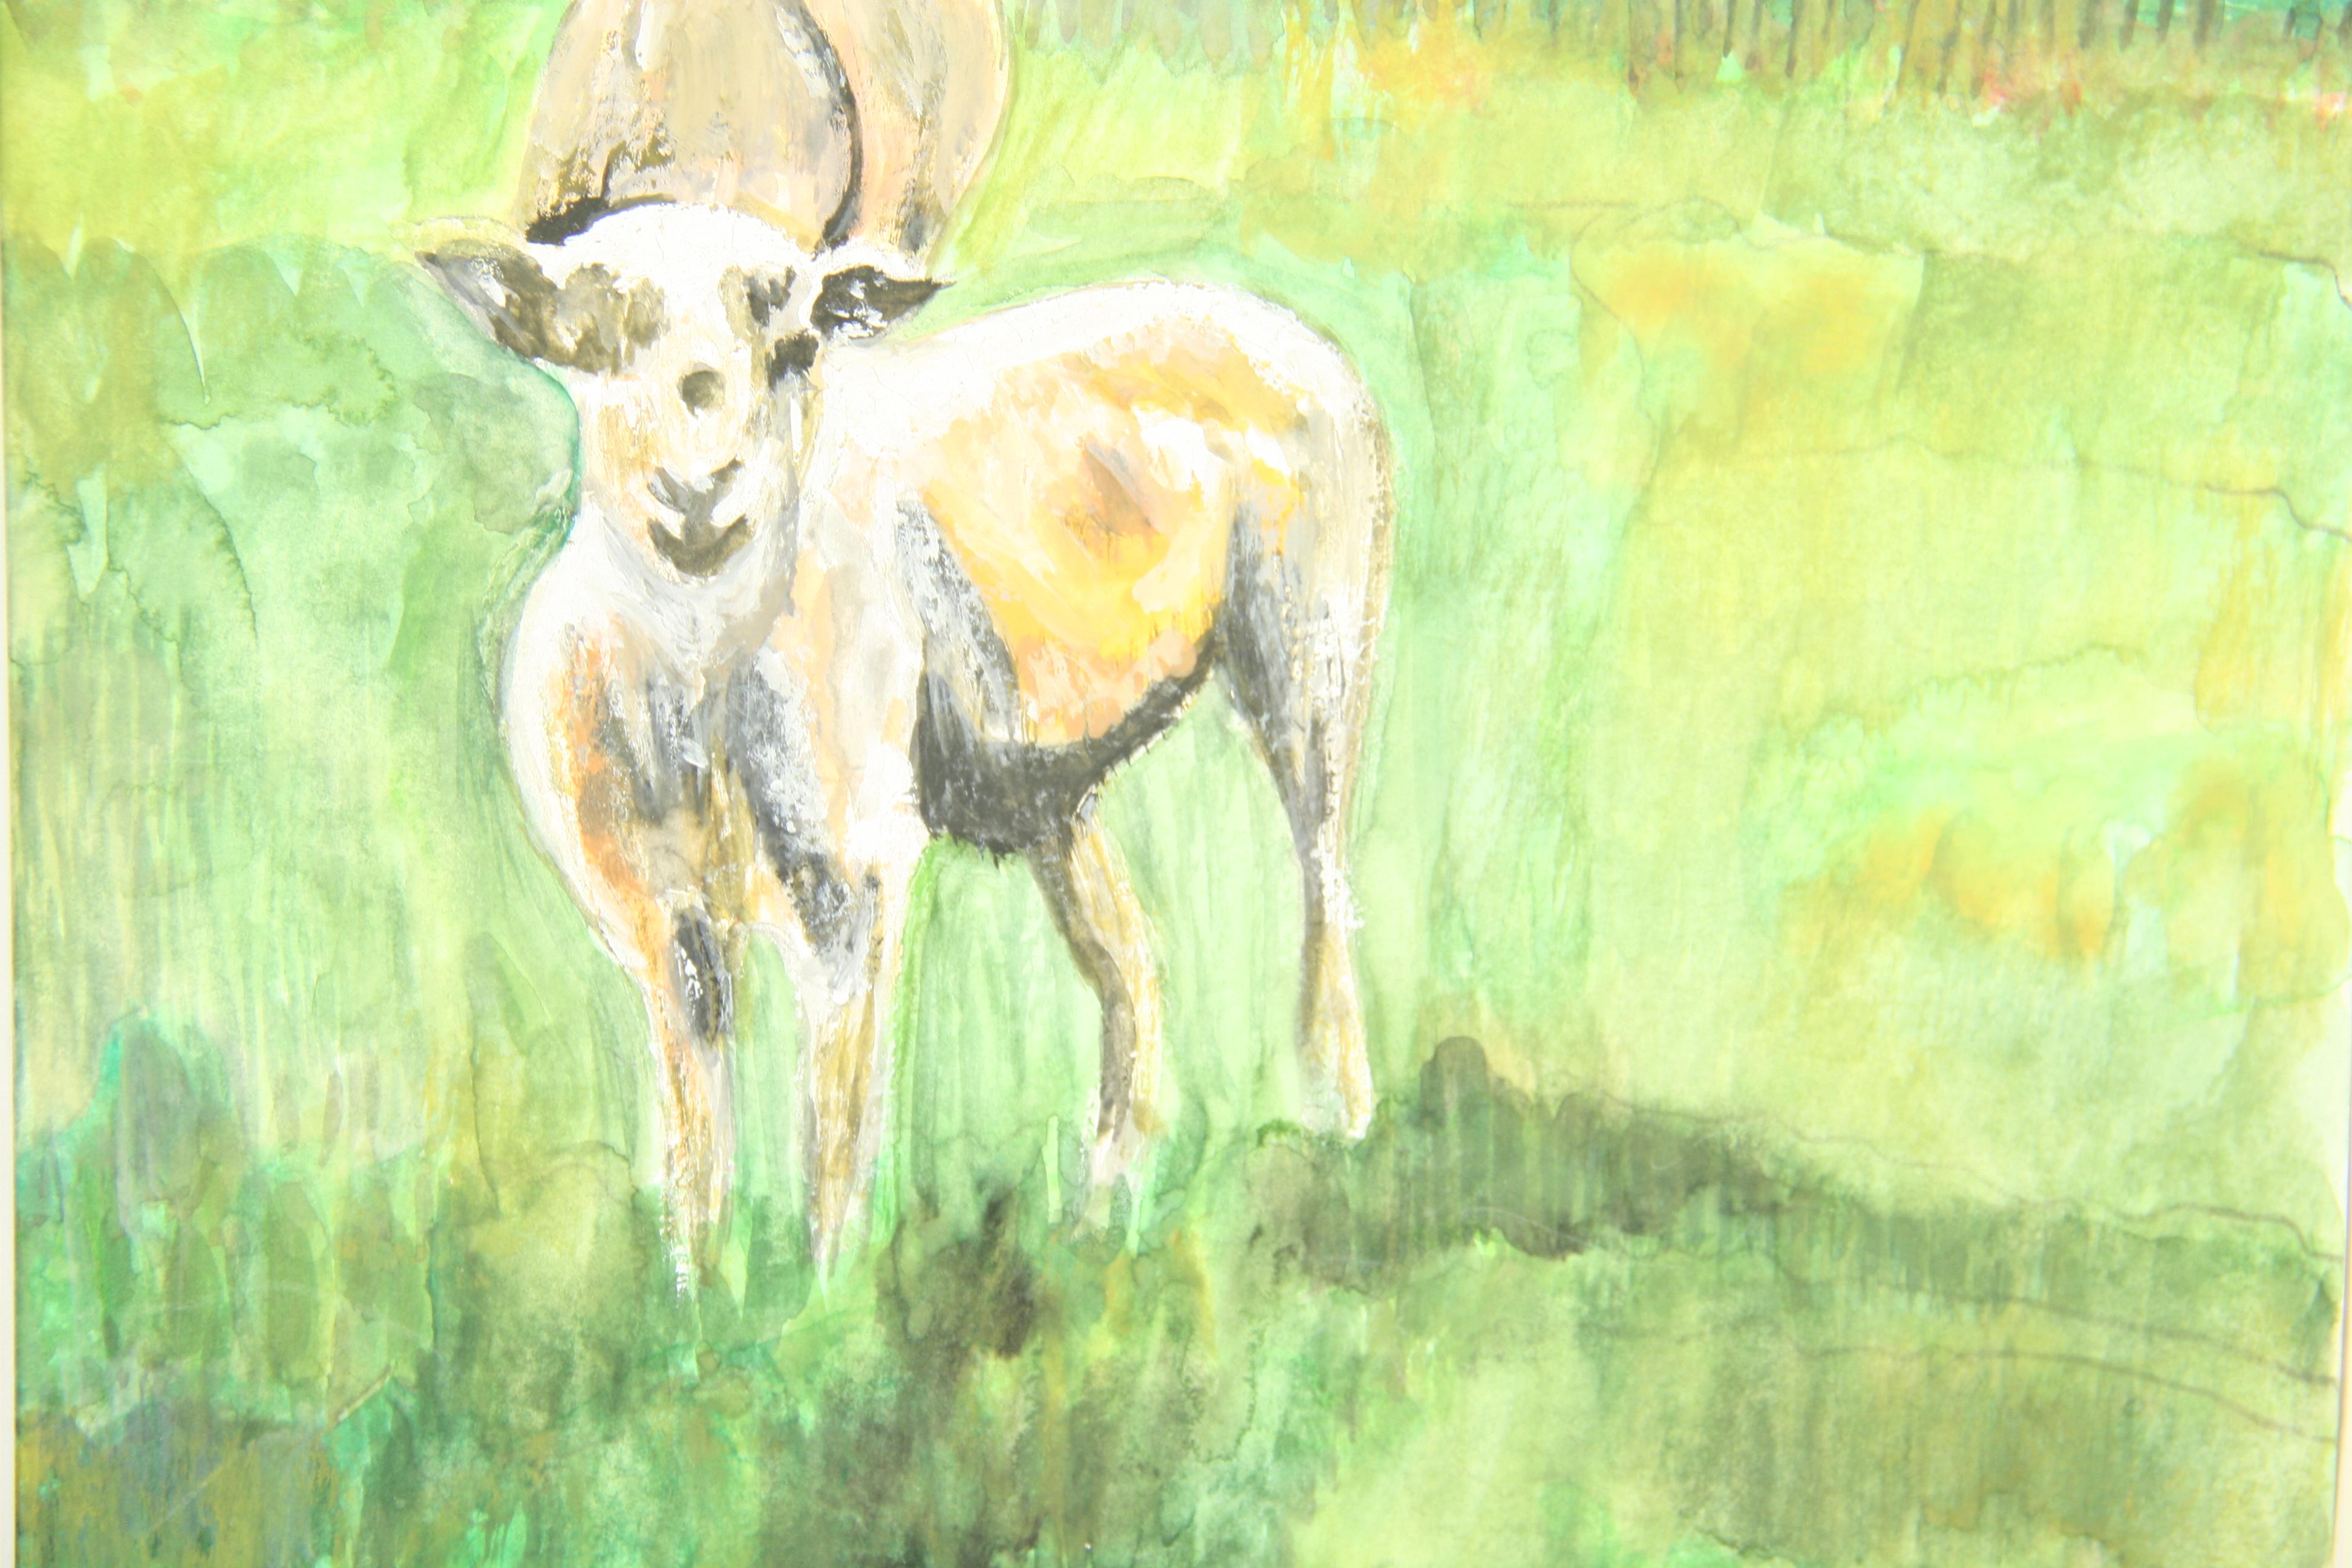 Sheep Grazing - Green Landscape Painting by Brunetti